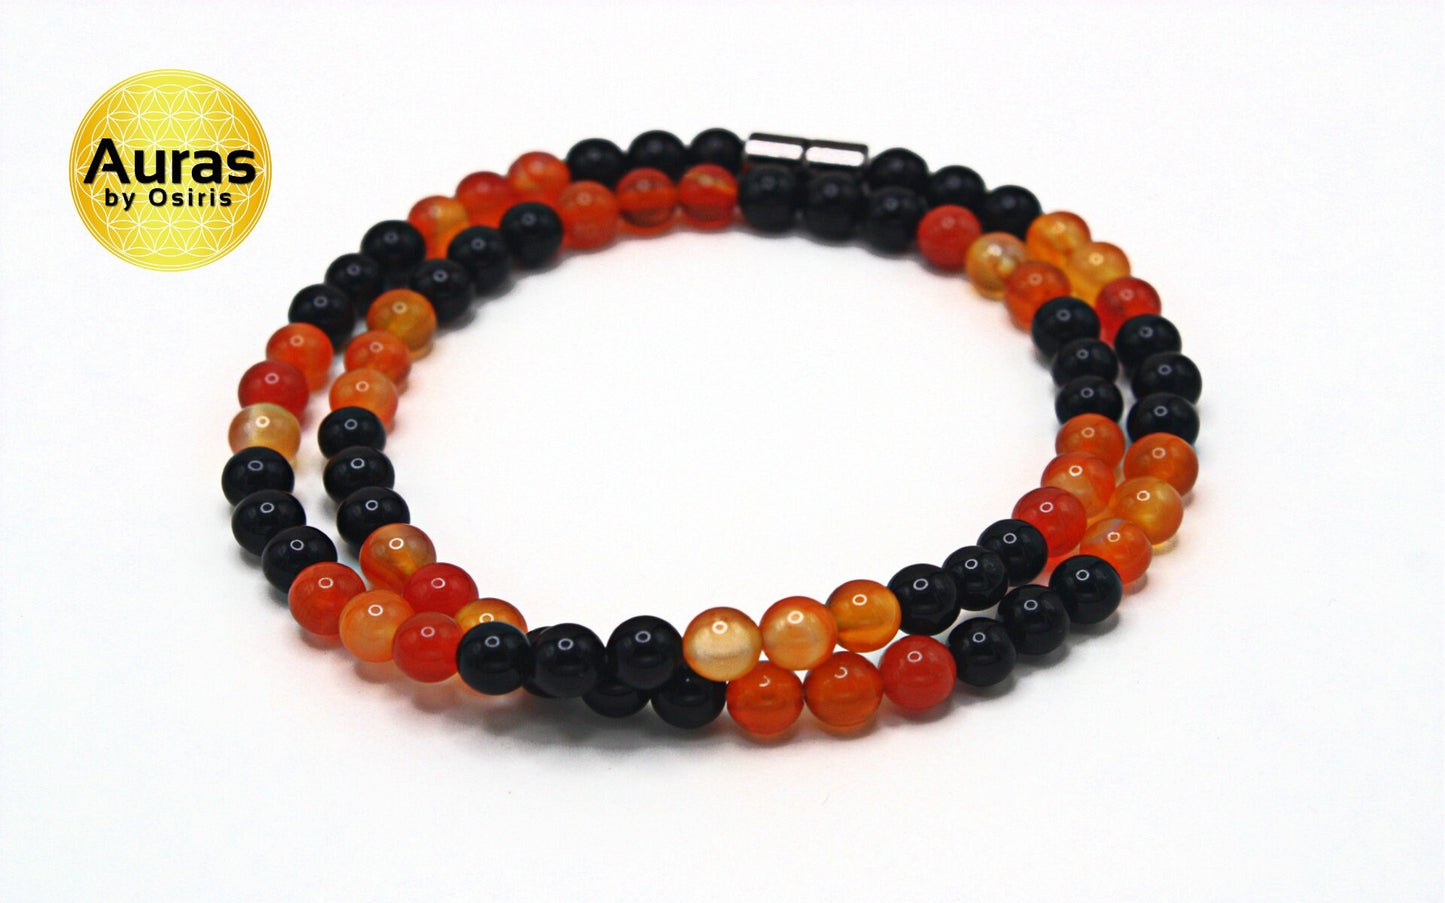 Monarch Necklace or Bracelet Natural Gemstone, Energizing and Motivating Crystal Jewelry for Men/Women